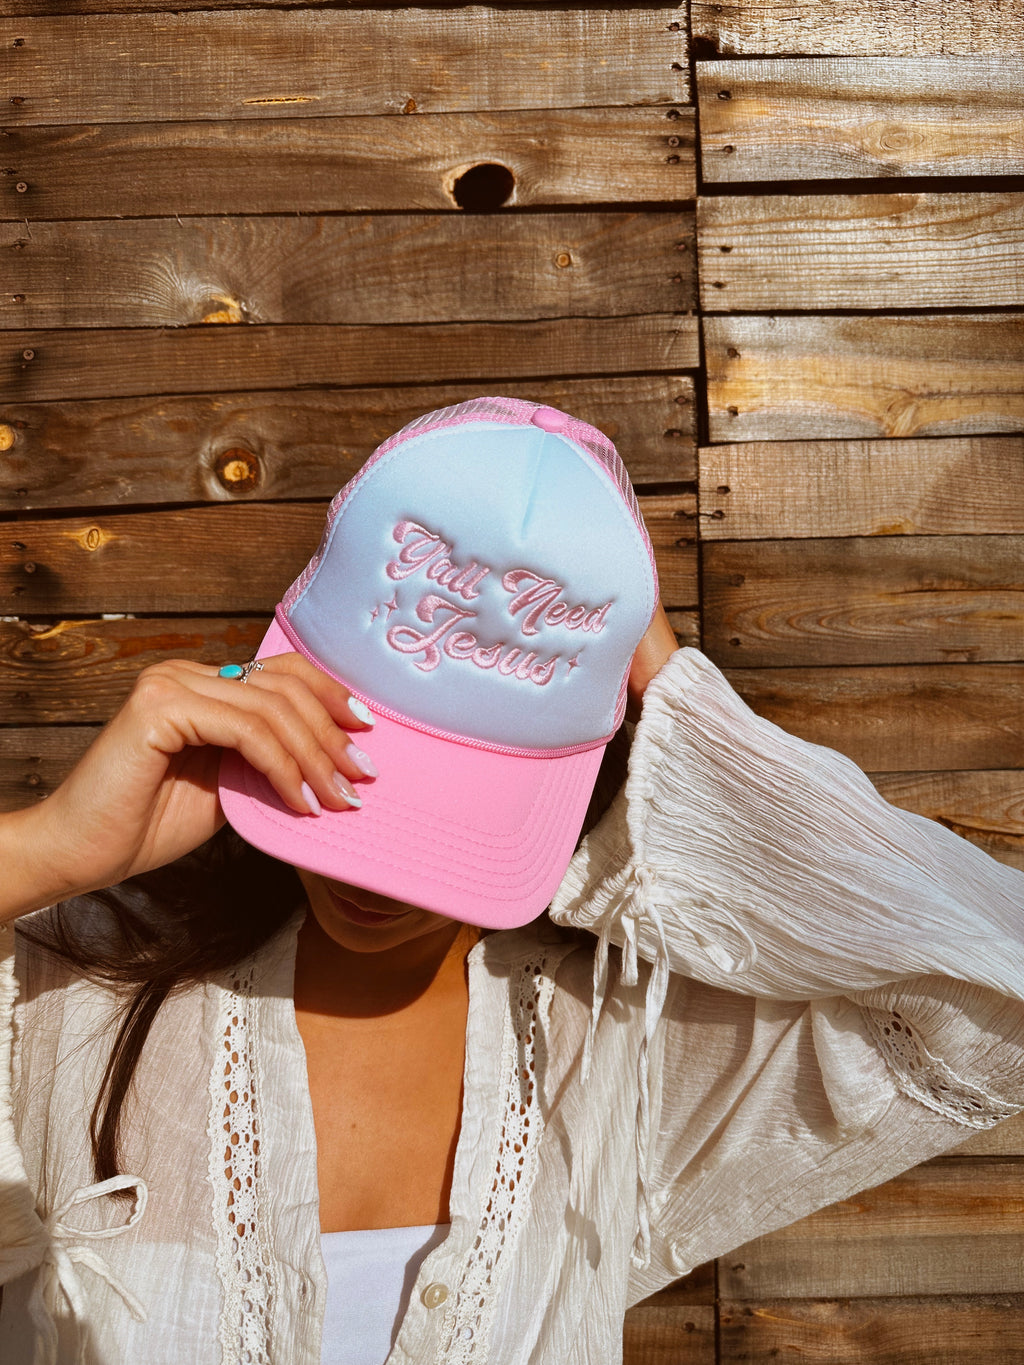 Y'all Need Jesus Hat-Pink